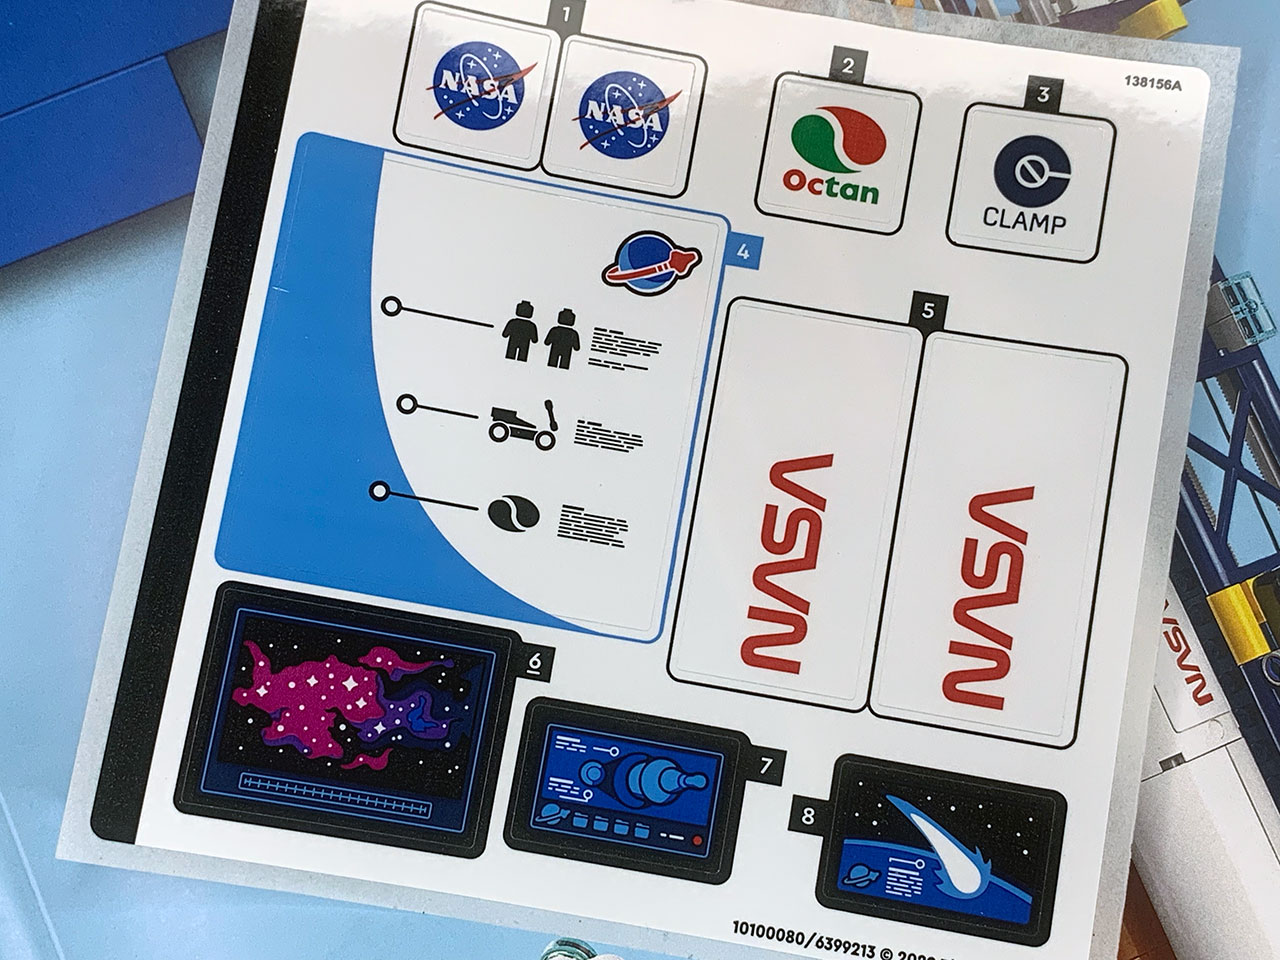 The Lego Rocket Launch Center set includes decals to adorn the Space Launch System (SLS) rocket with NASA's "meatball" and "worm" logos, as appear on the real-life booster.